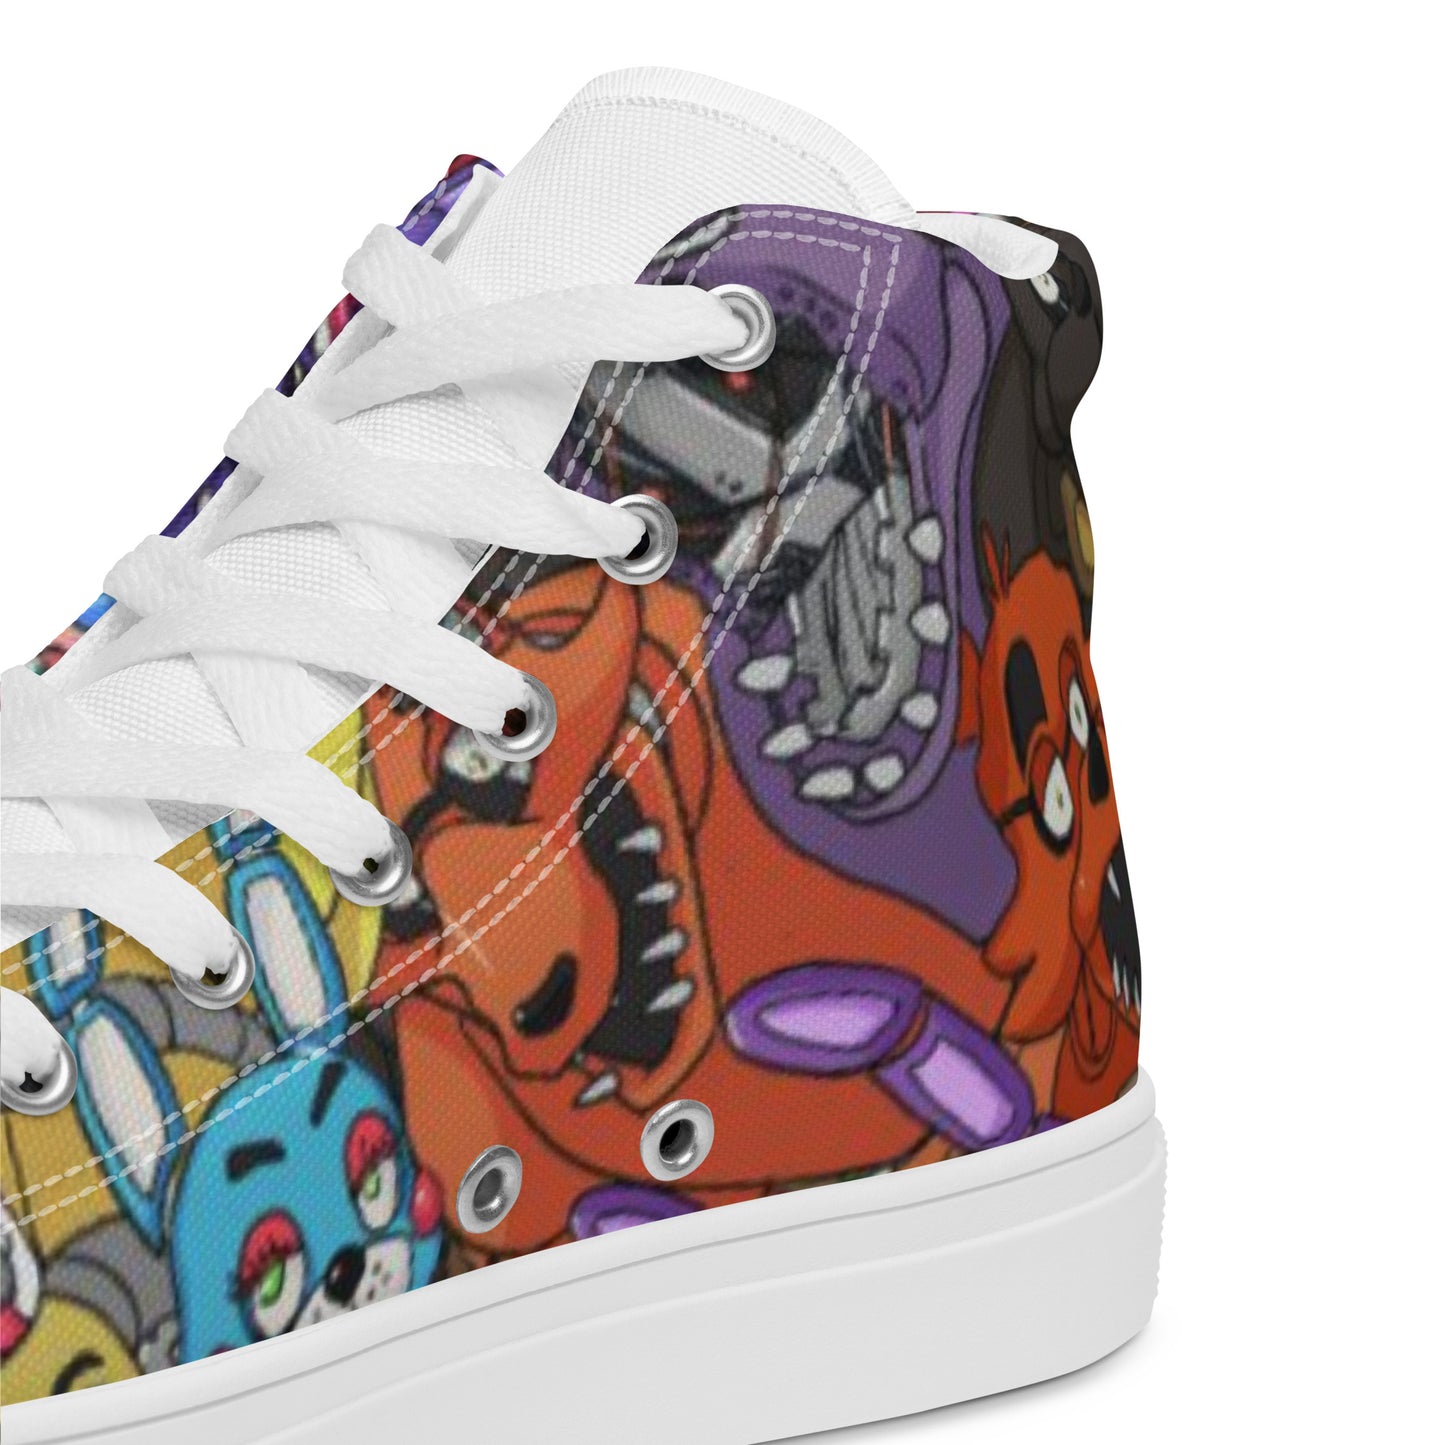 FNAF pattern Women’s high top canvas shoes